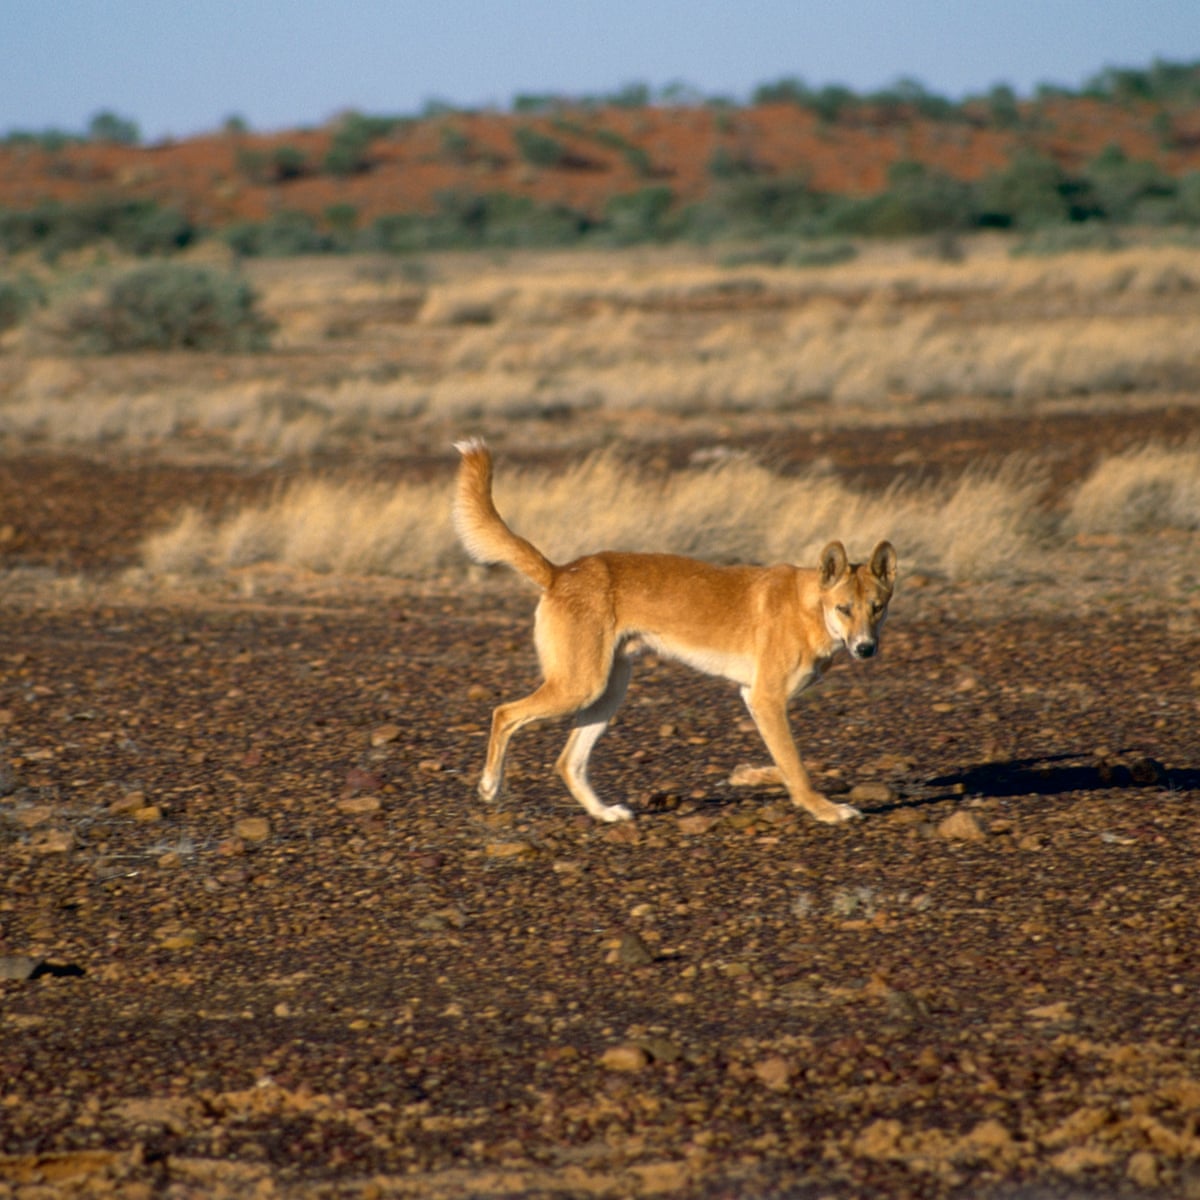 Most wild dogs killed across rural Australia are pure dingoes, DNA research  says | Environment | The Guardian